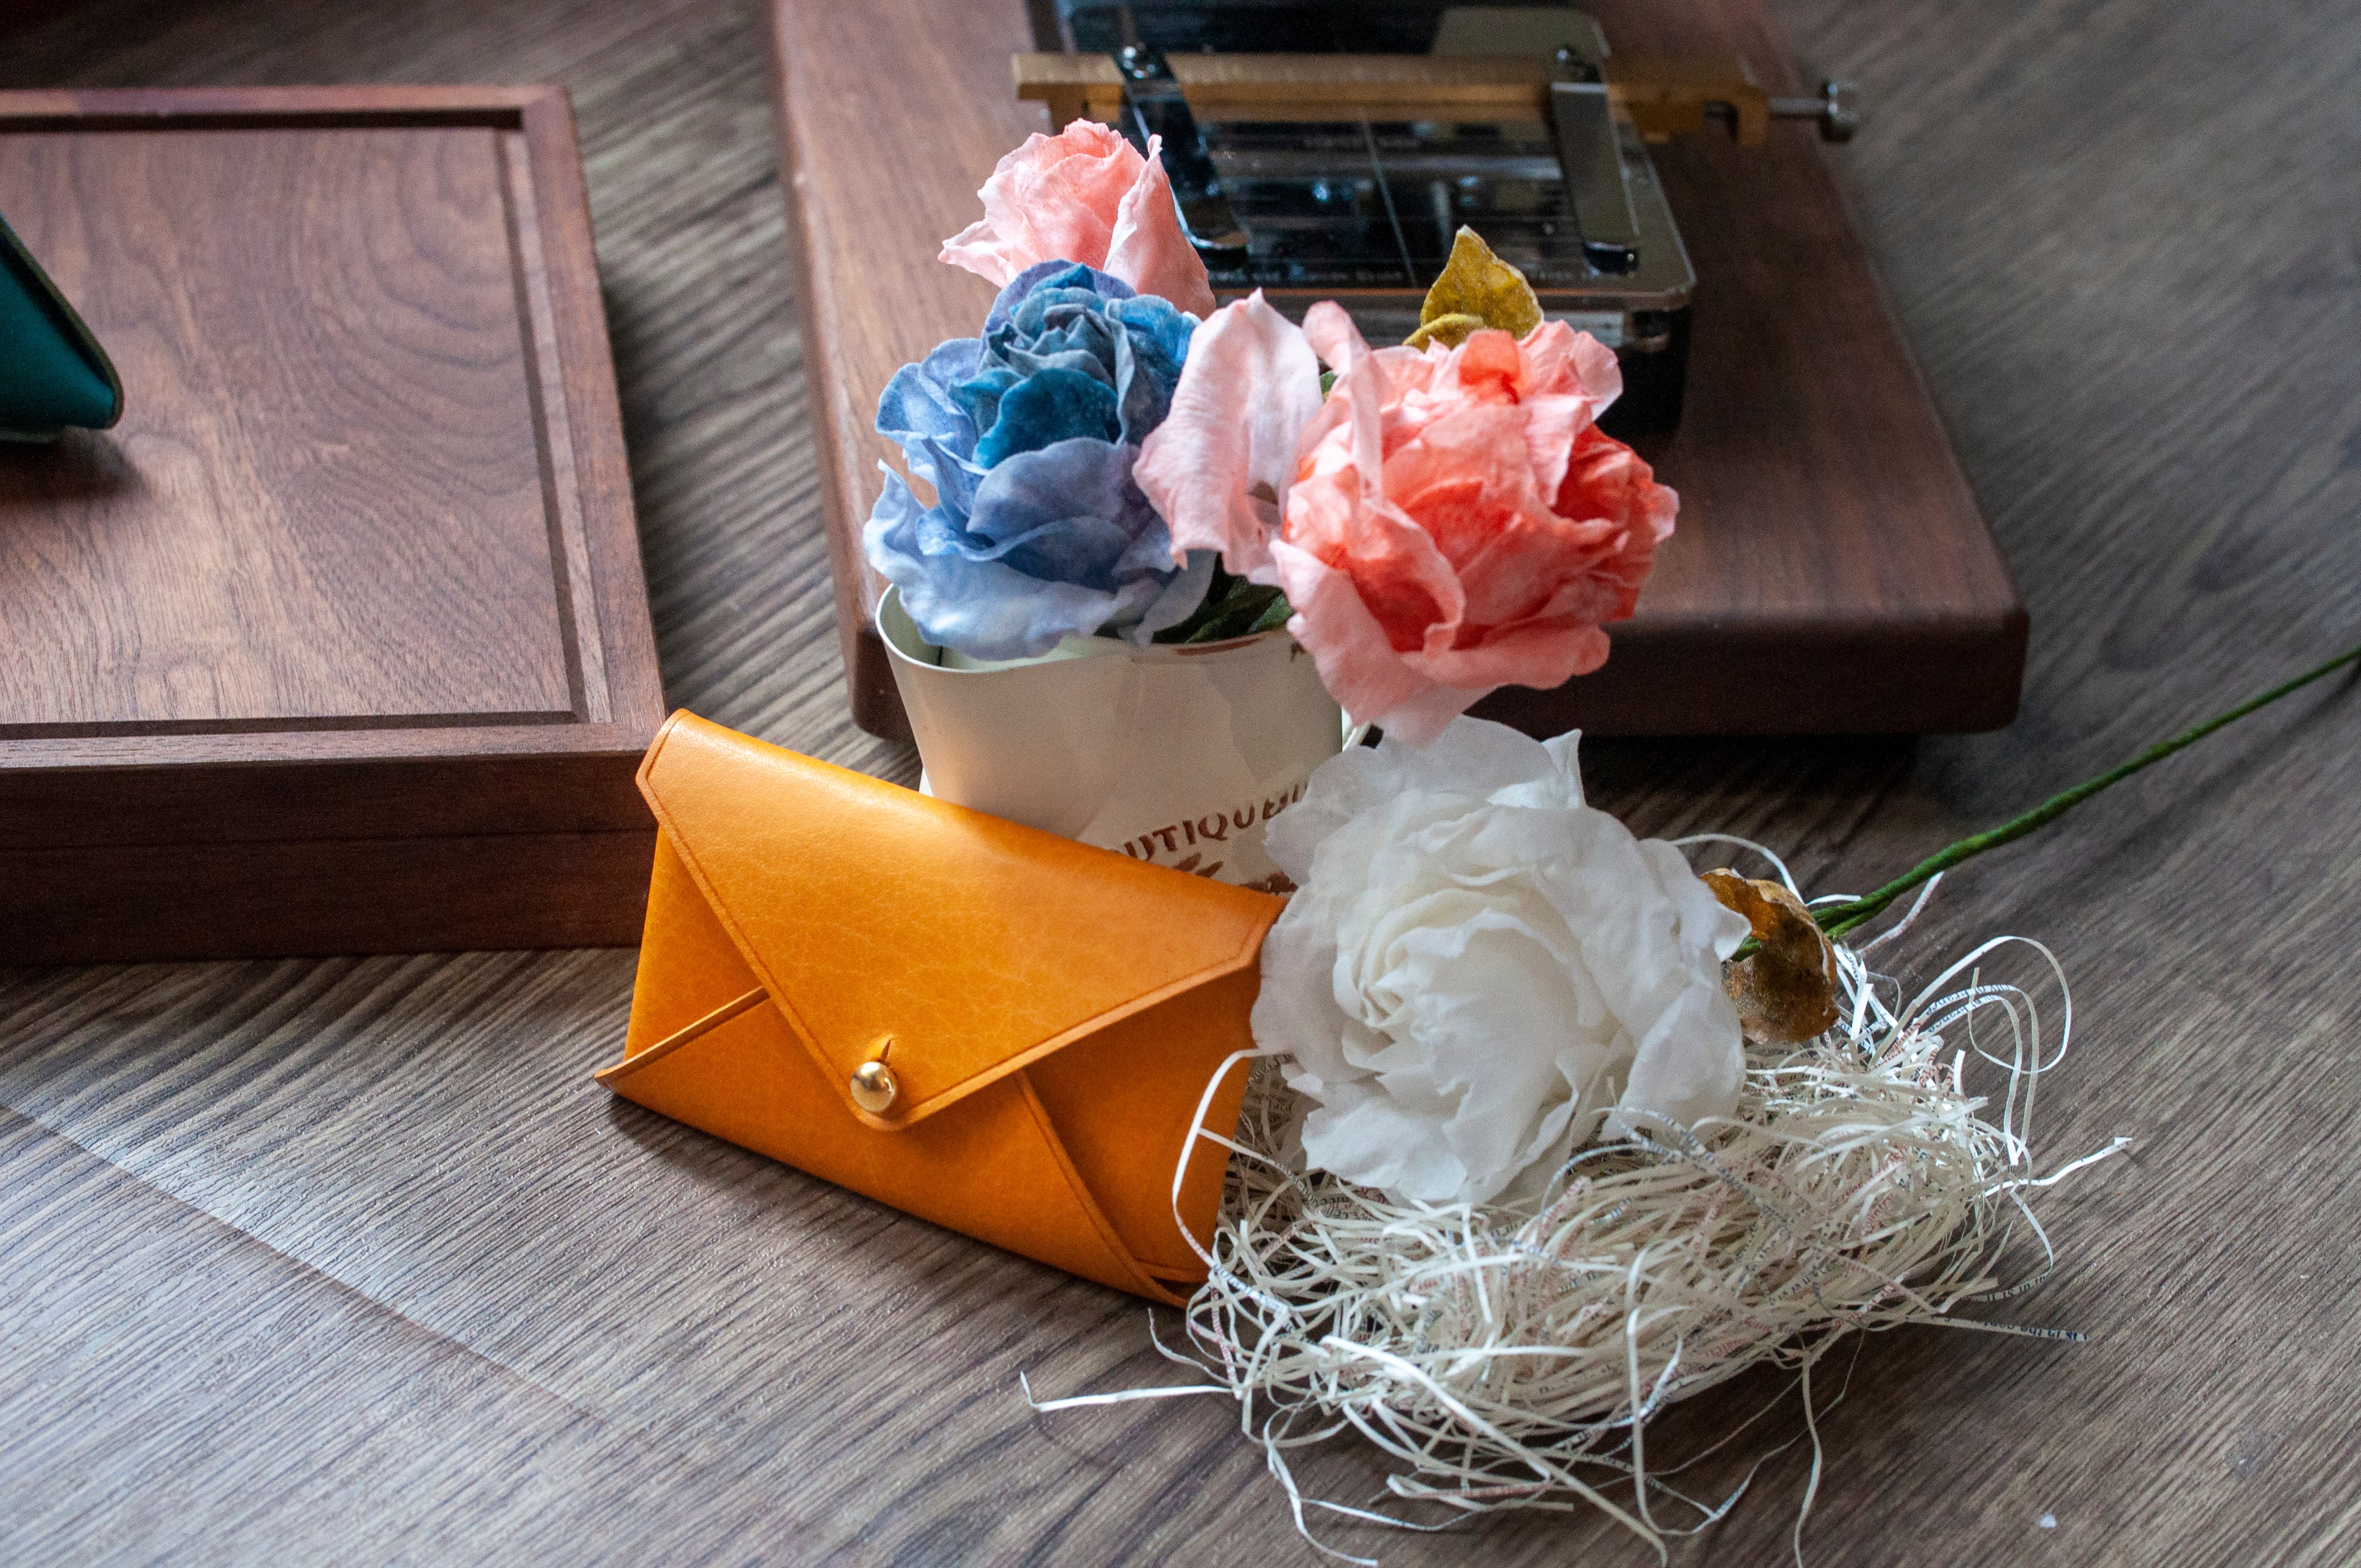 Leather Craft and Wafer Paper Flower Art - Crafune x Natalie (15th Aug, 11.15 am) - Crafune